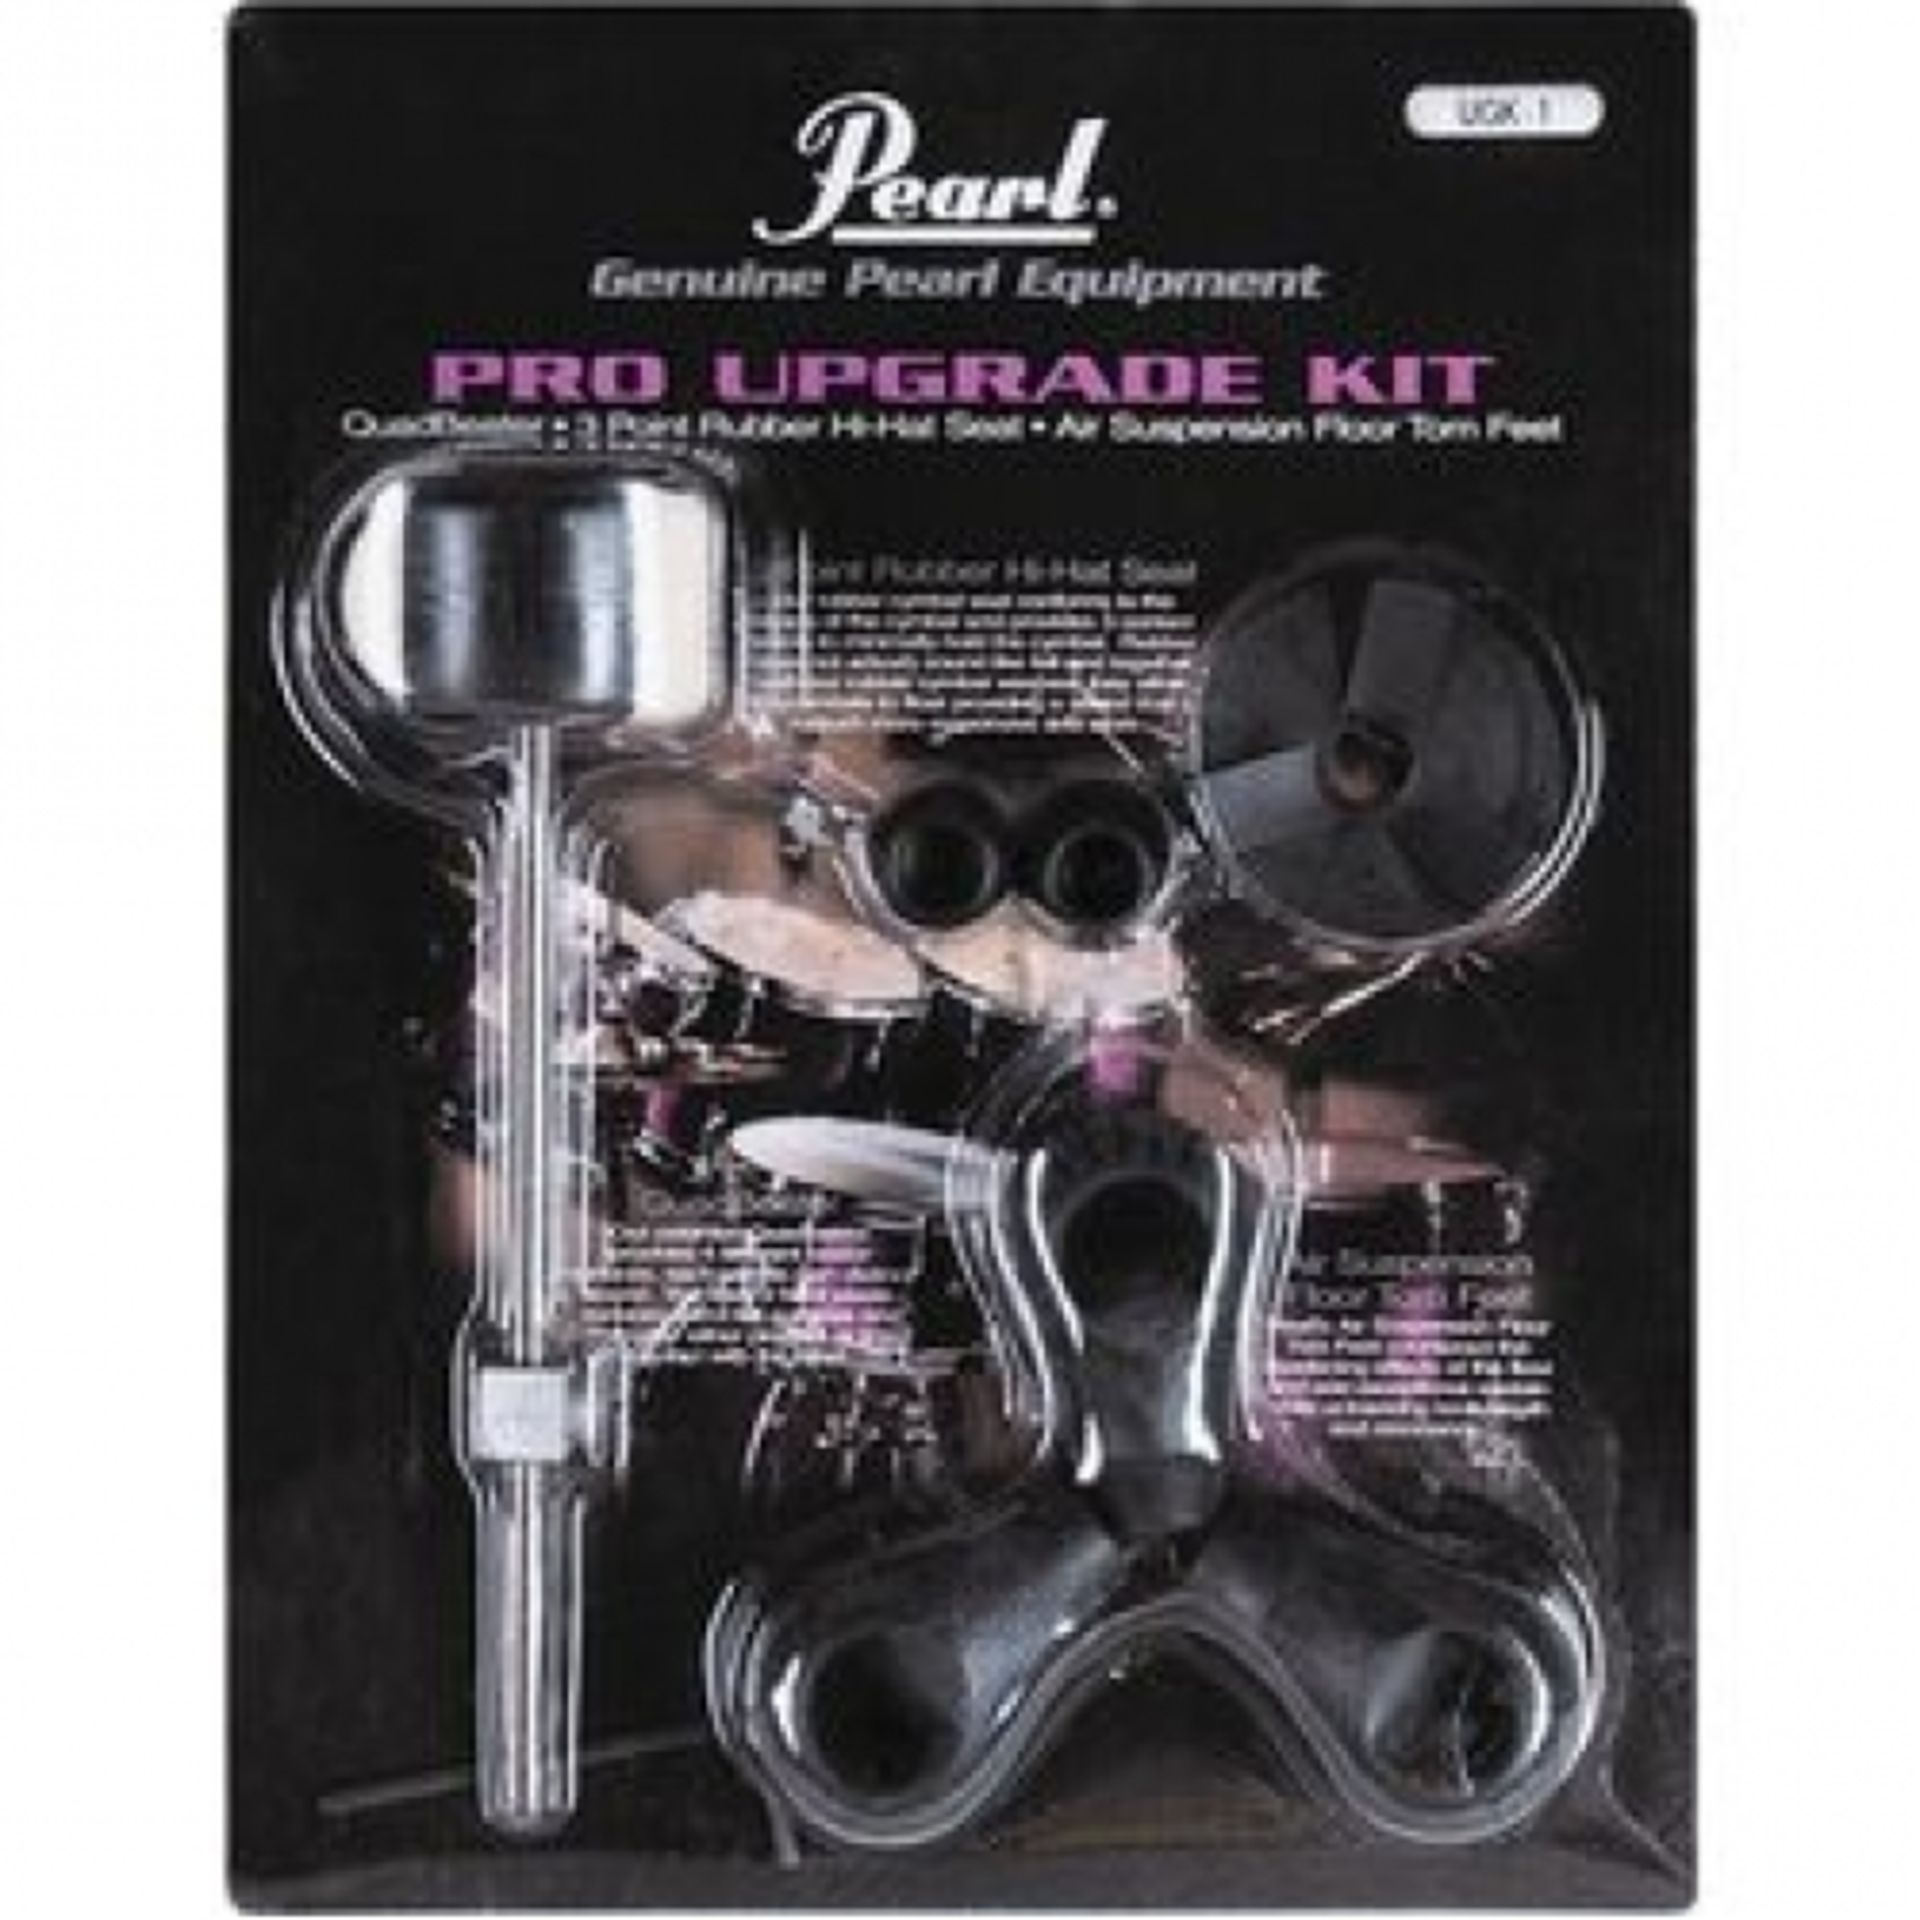 1 x Pearl UGK-1 Drum Upgrade Kit - CL020 - Designed to be a Sound Enhancing Upgrade For ELX/EX and - Image 3 of 4